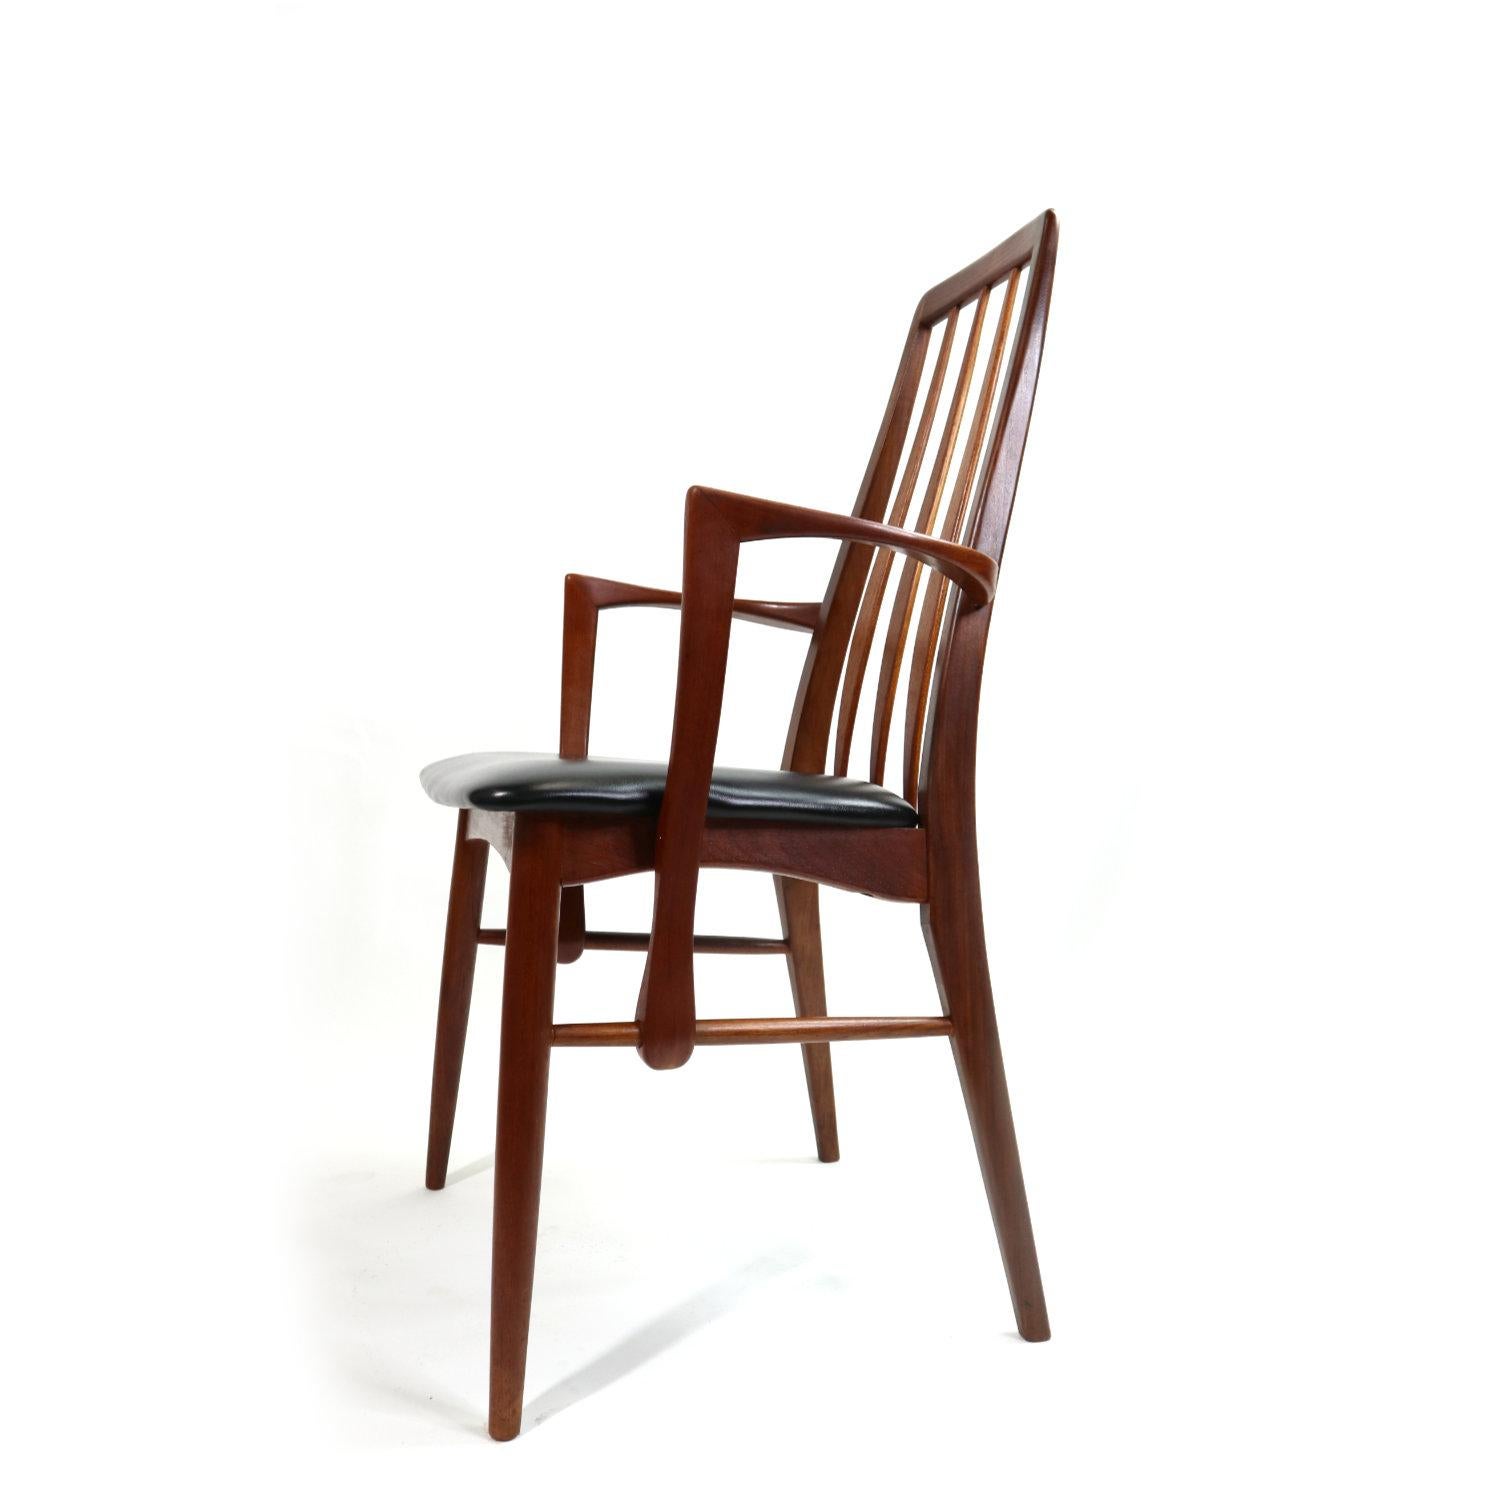 This stunning set of six rosewood 'Eva' dining chairs was designed by Niels Koefoed for Koefoeds Hornslet, circa 1964. These lightweight, but well built and sturdy beauties possess a solid rosewood frame with gently arched backs which give ergonomic